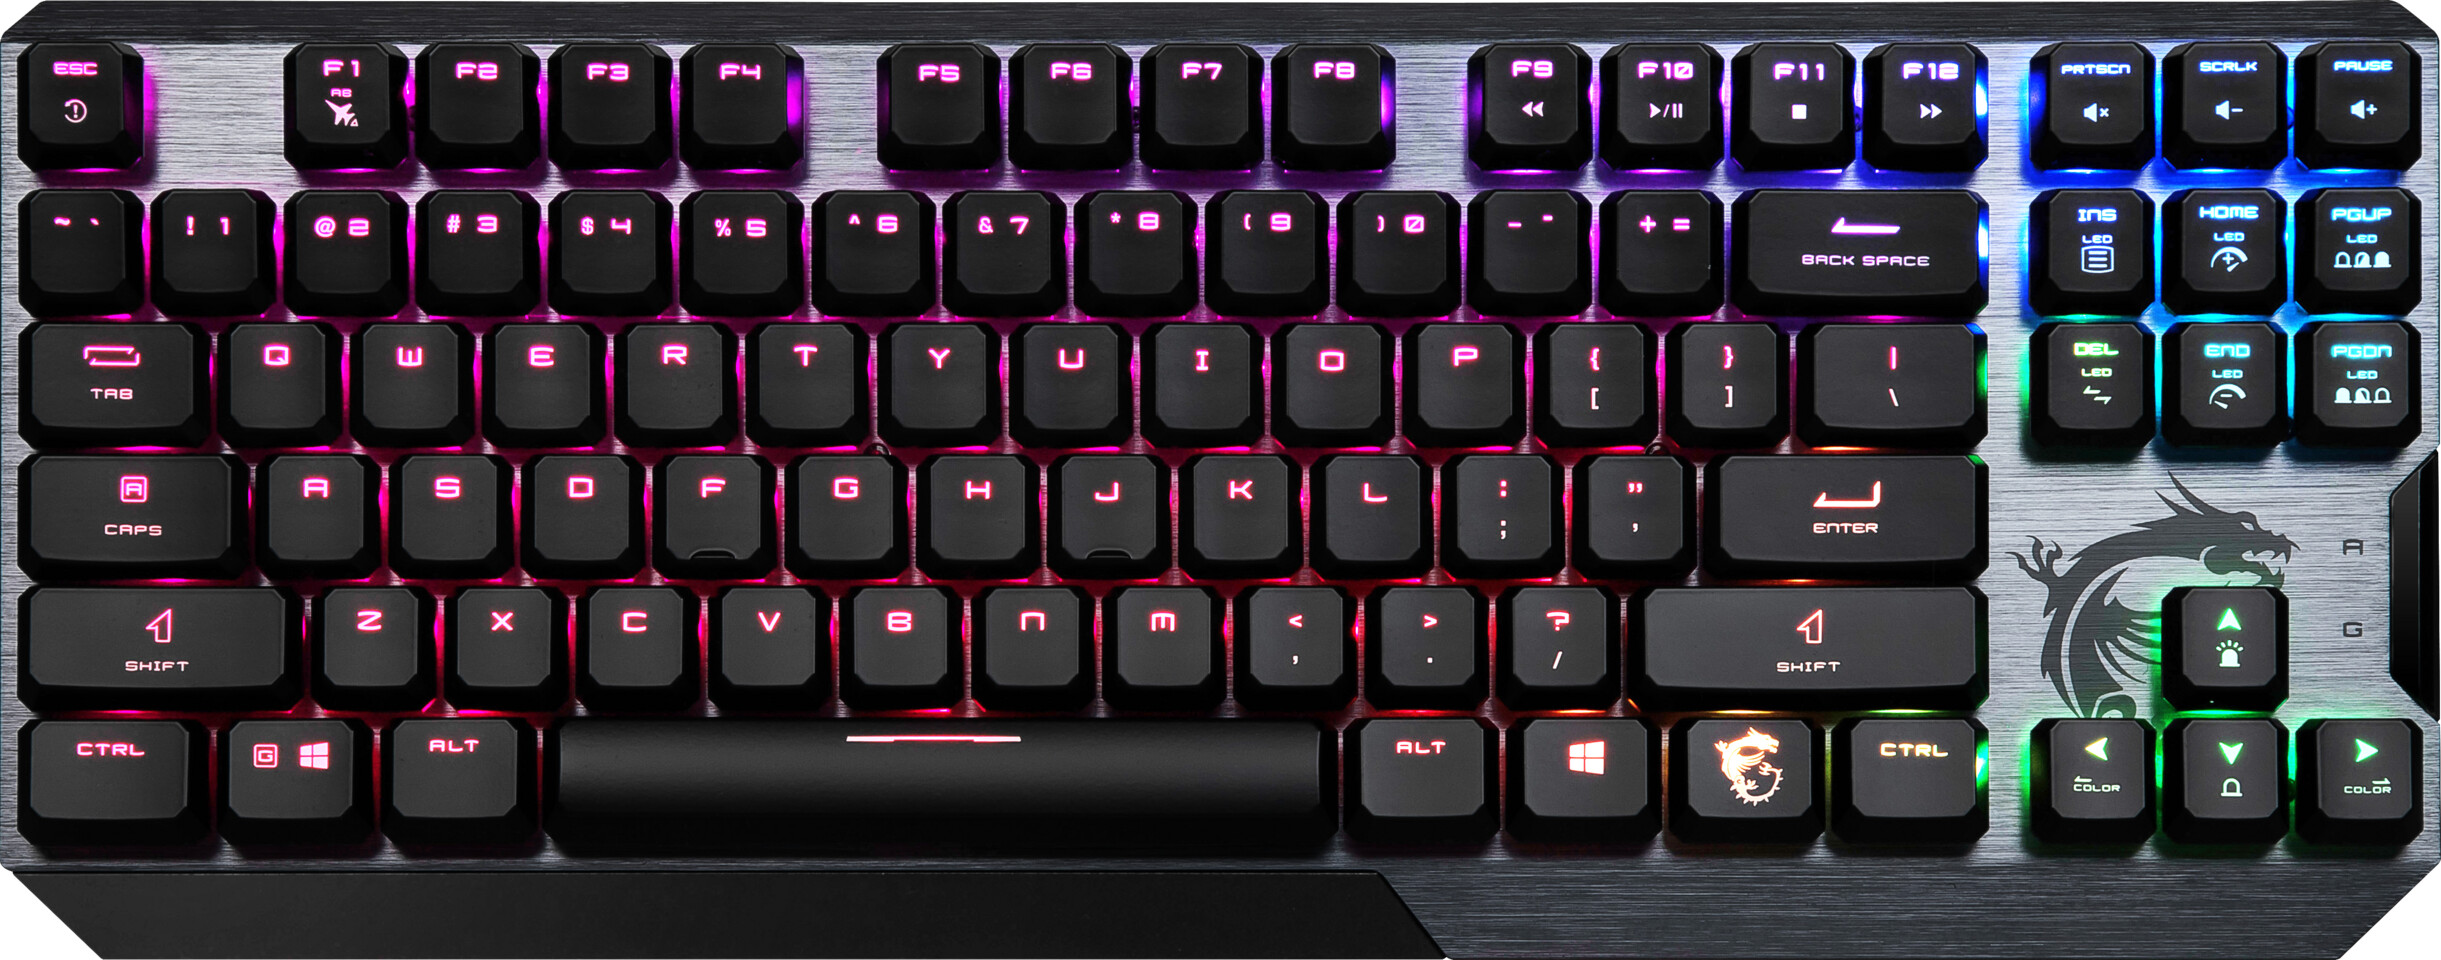 Test/review : nouveau clavier gaming MSI Vigor GK71 Sonic